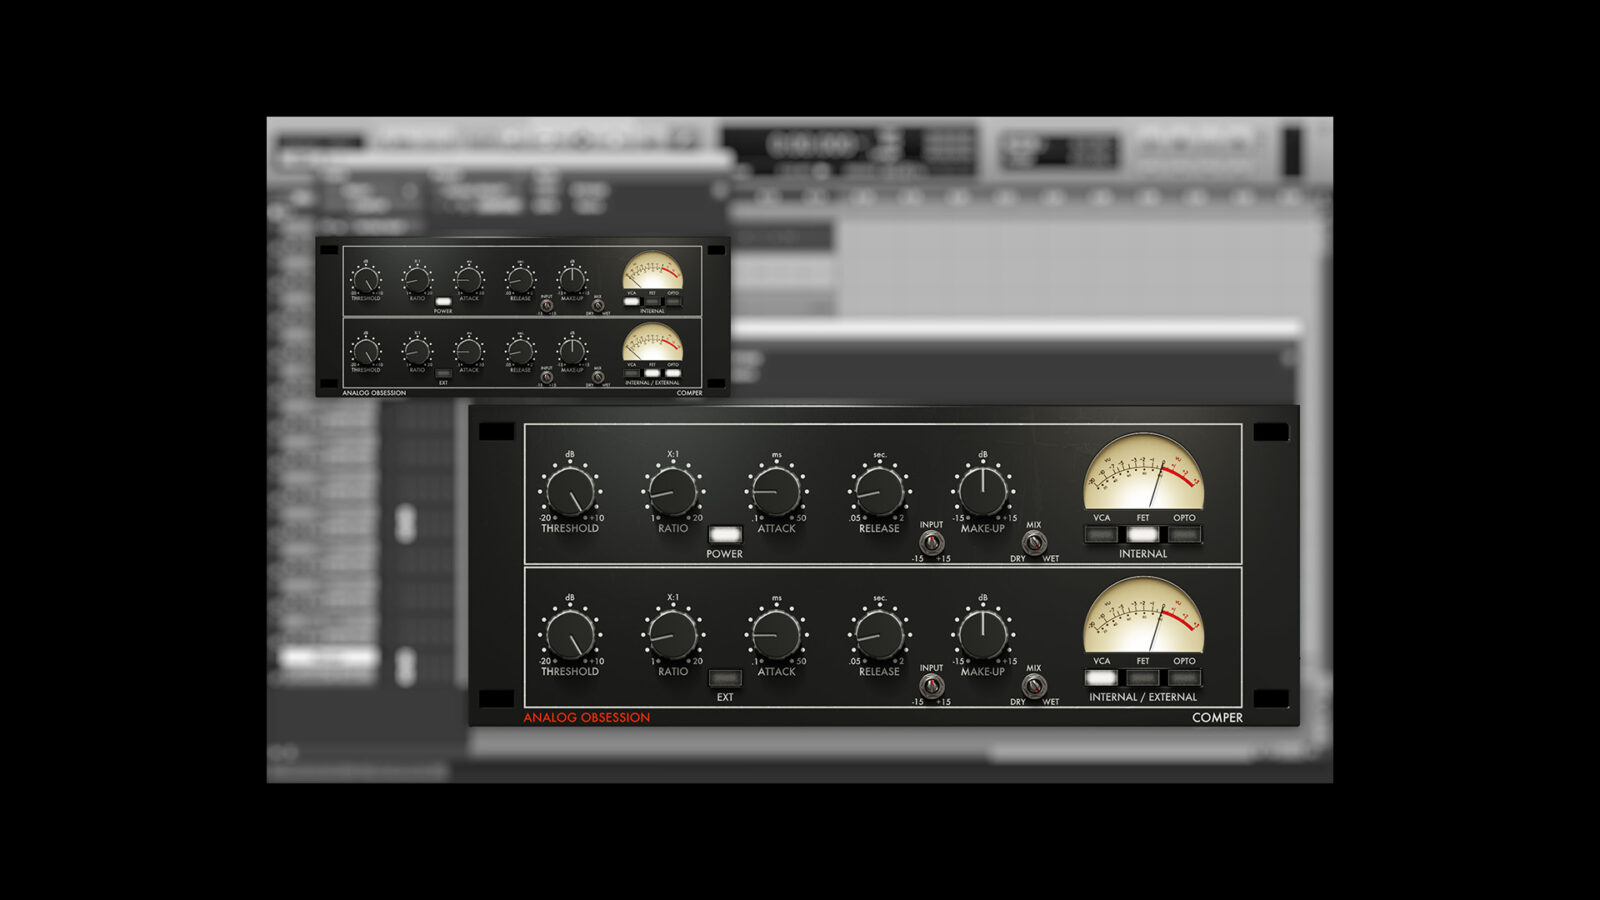 Comper Is A Free Compressor Effect Plugin By Analog Obsession